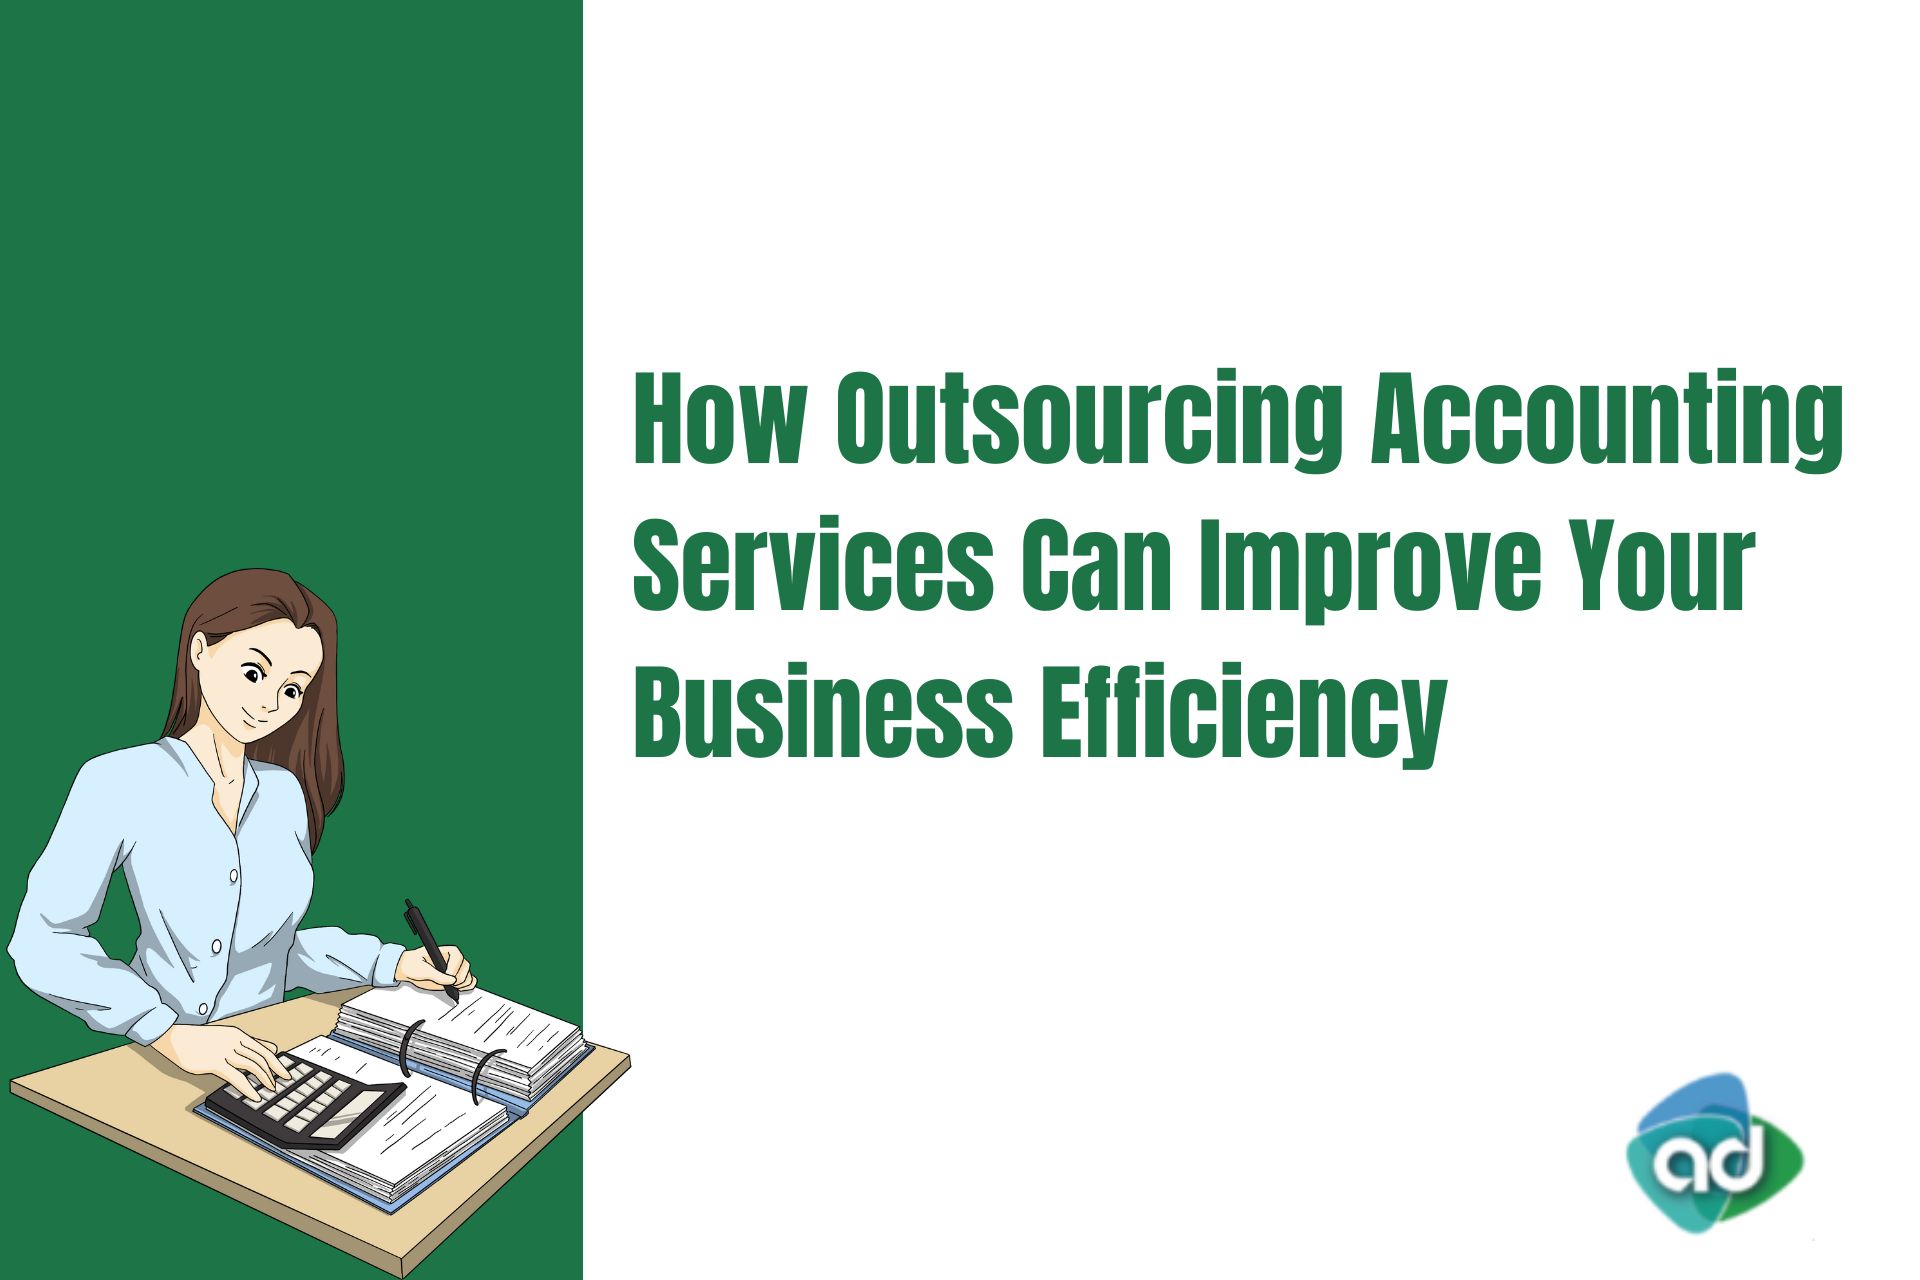 How Outsourcing Accounting Services Can Improve Your Business Efficiency